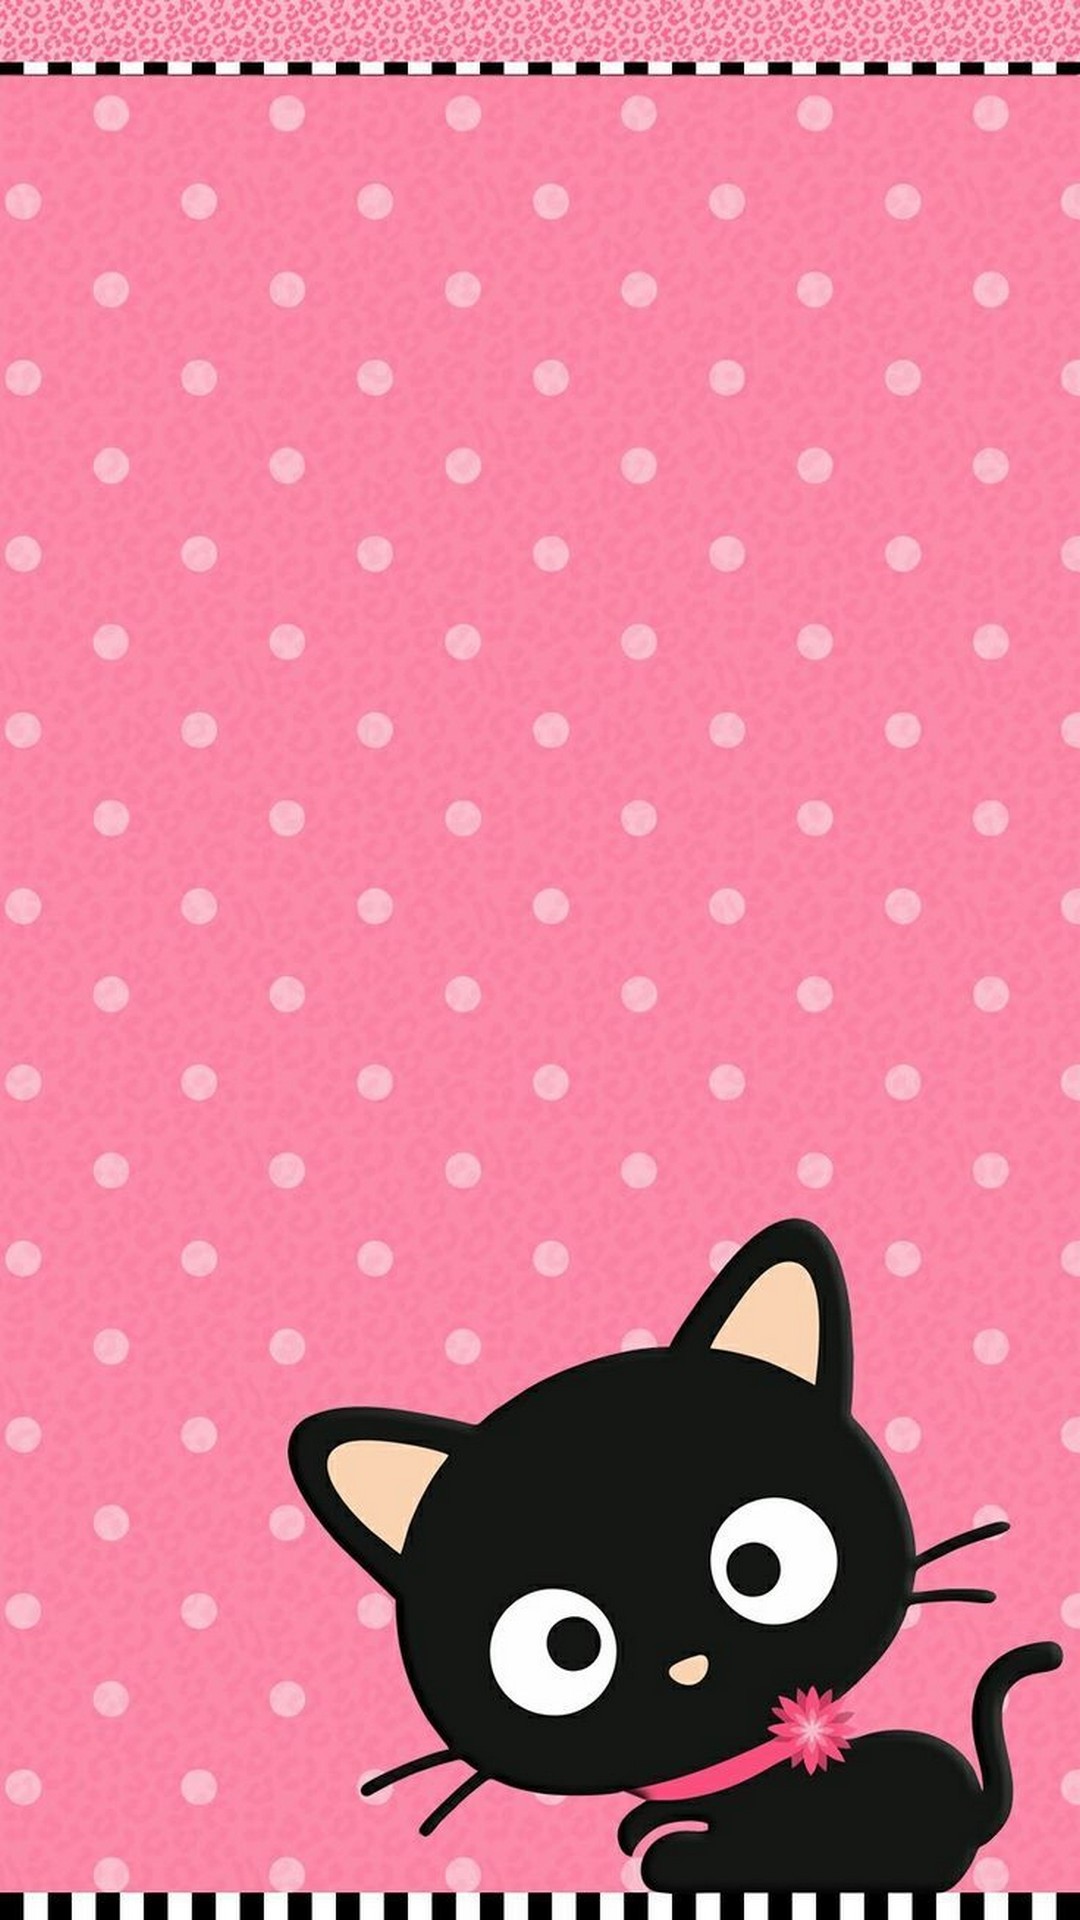 Animated Cat Pink Android Wallpaper with HD resolution 1080x1920